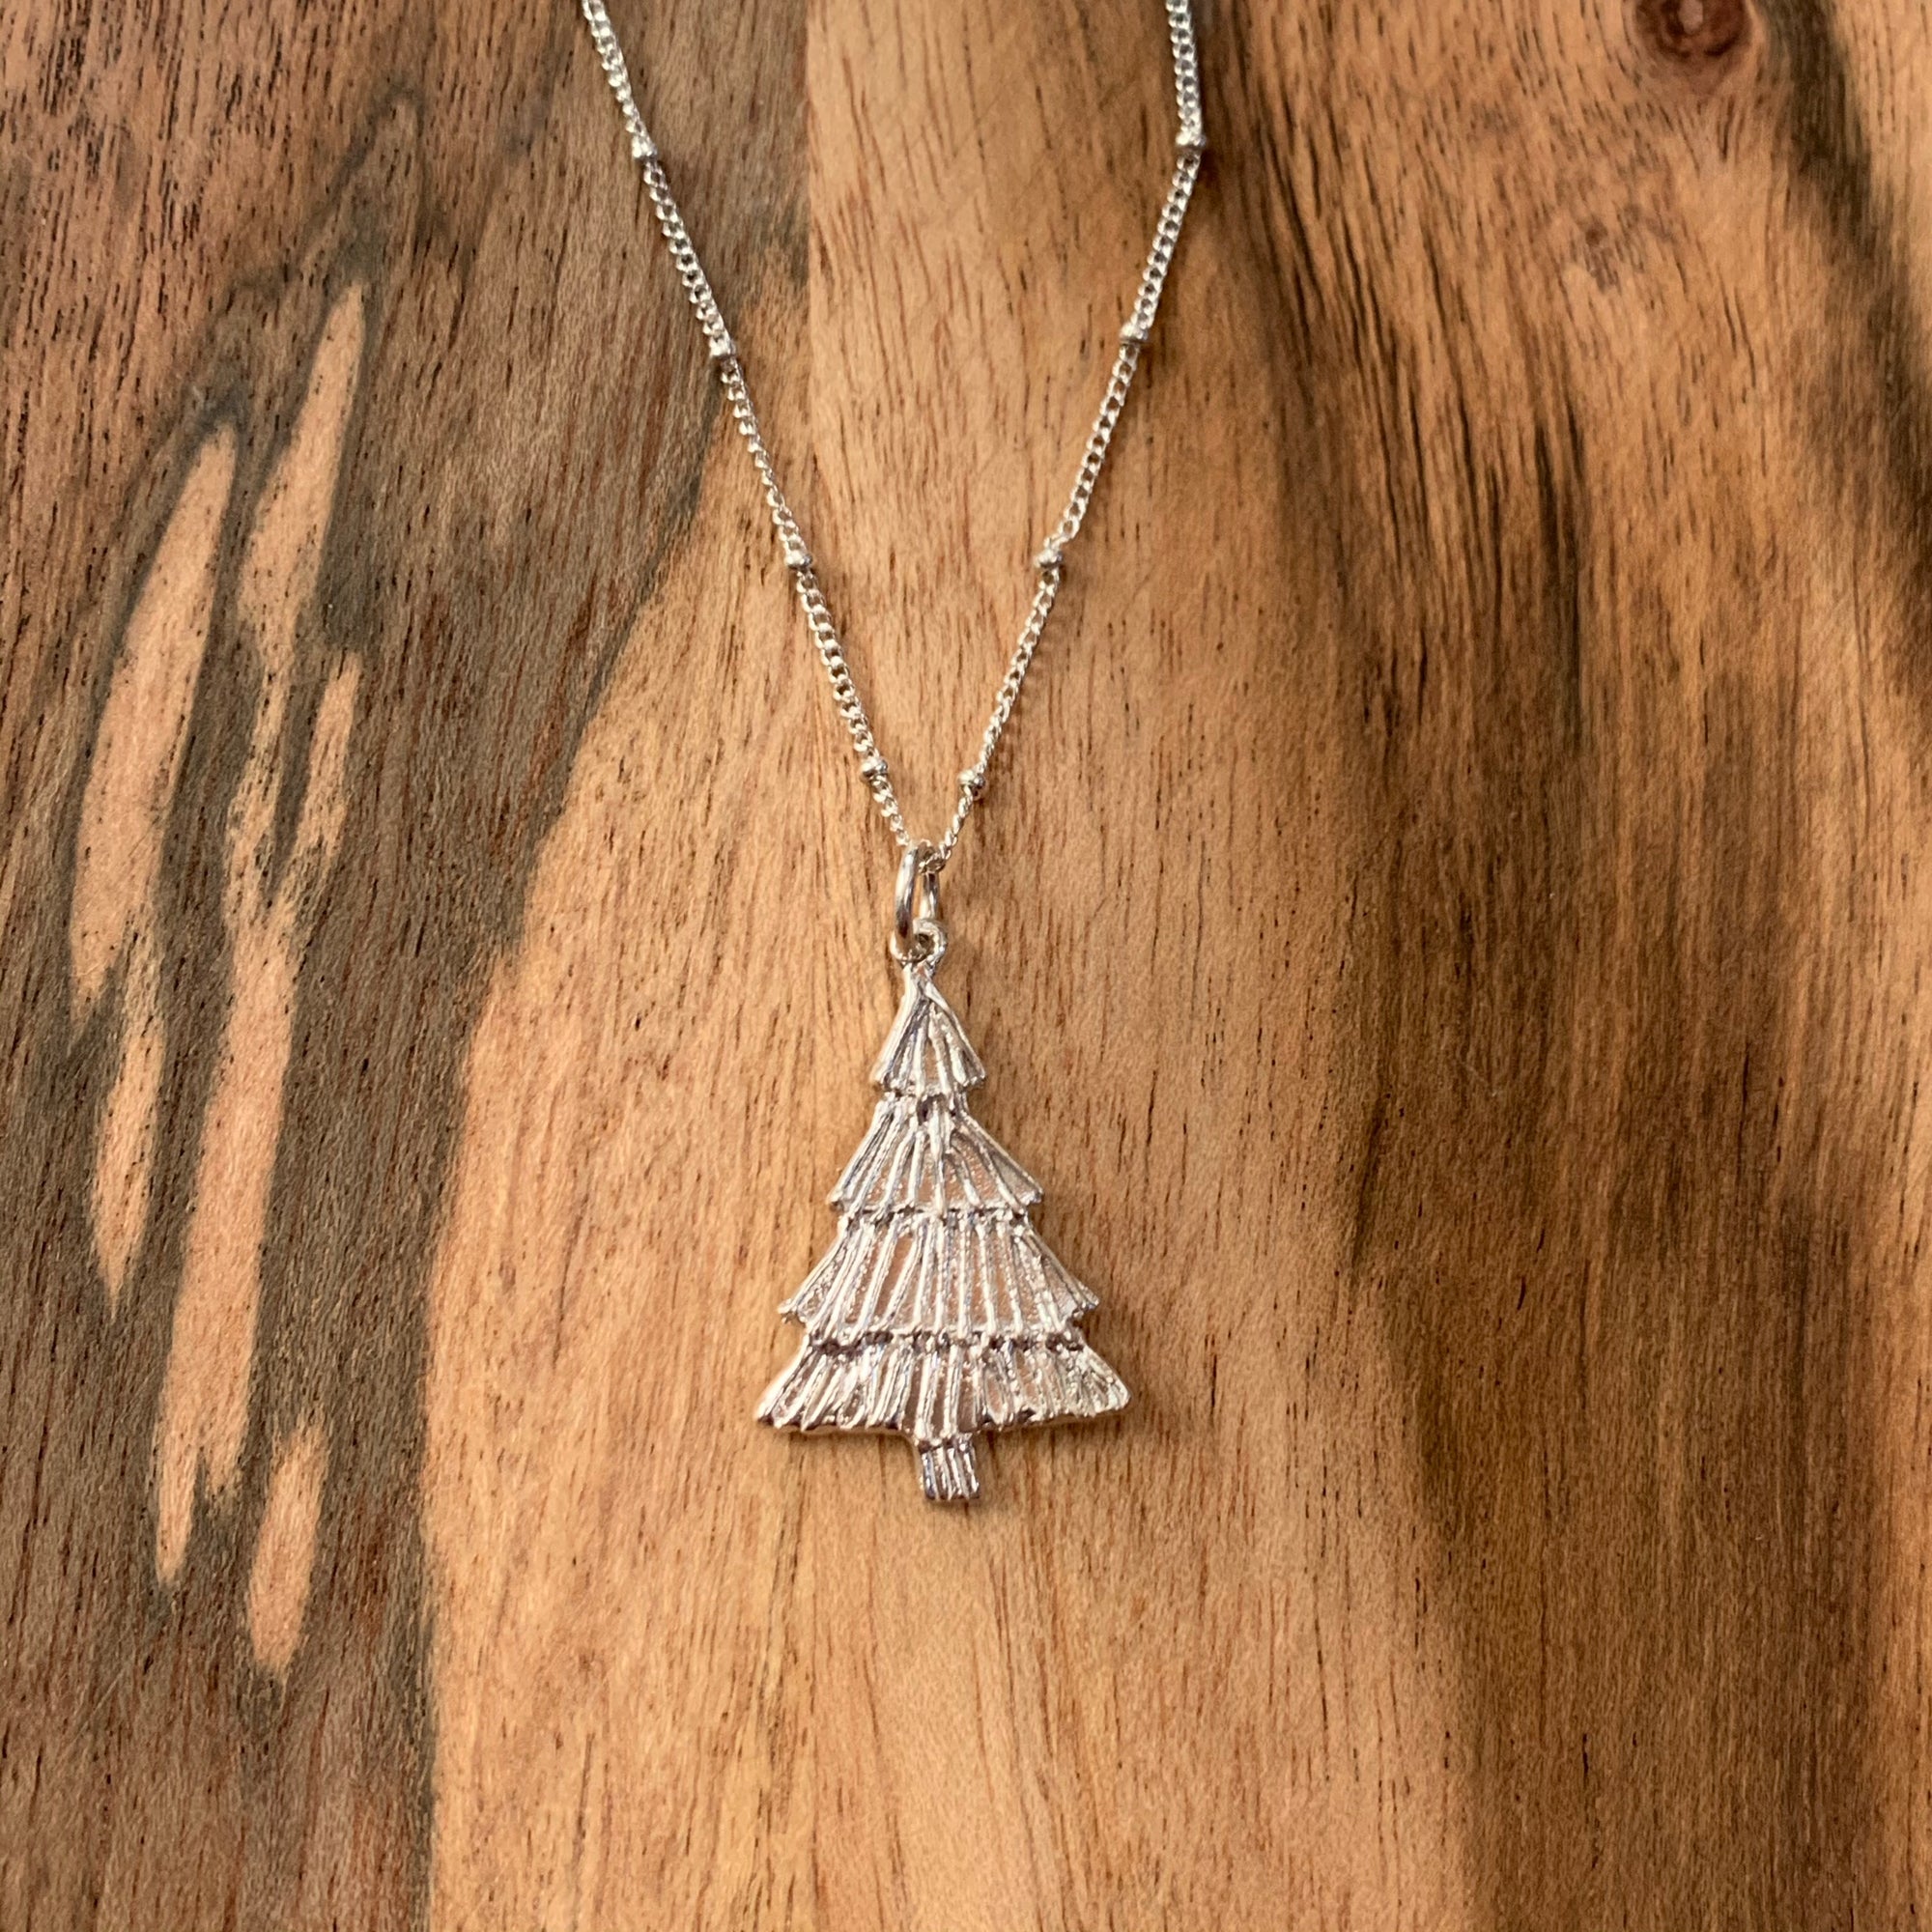 Old-Fashioned Christmas Tree Necklace